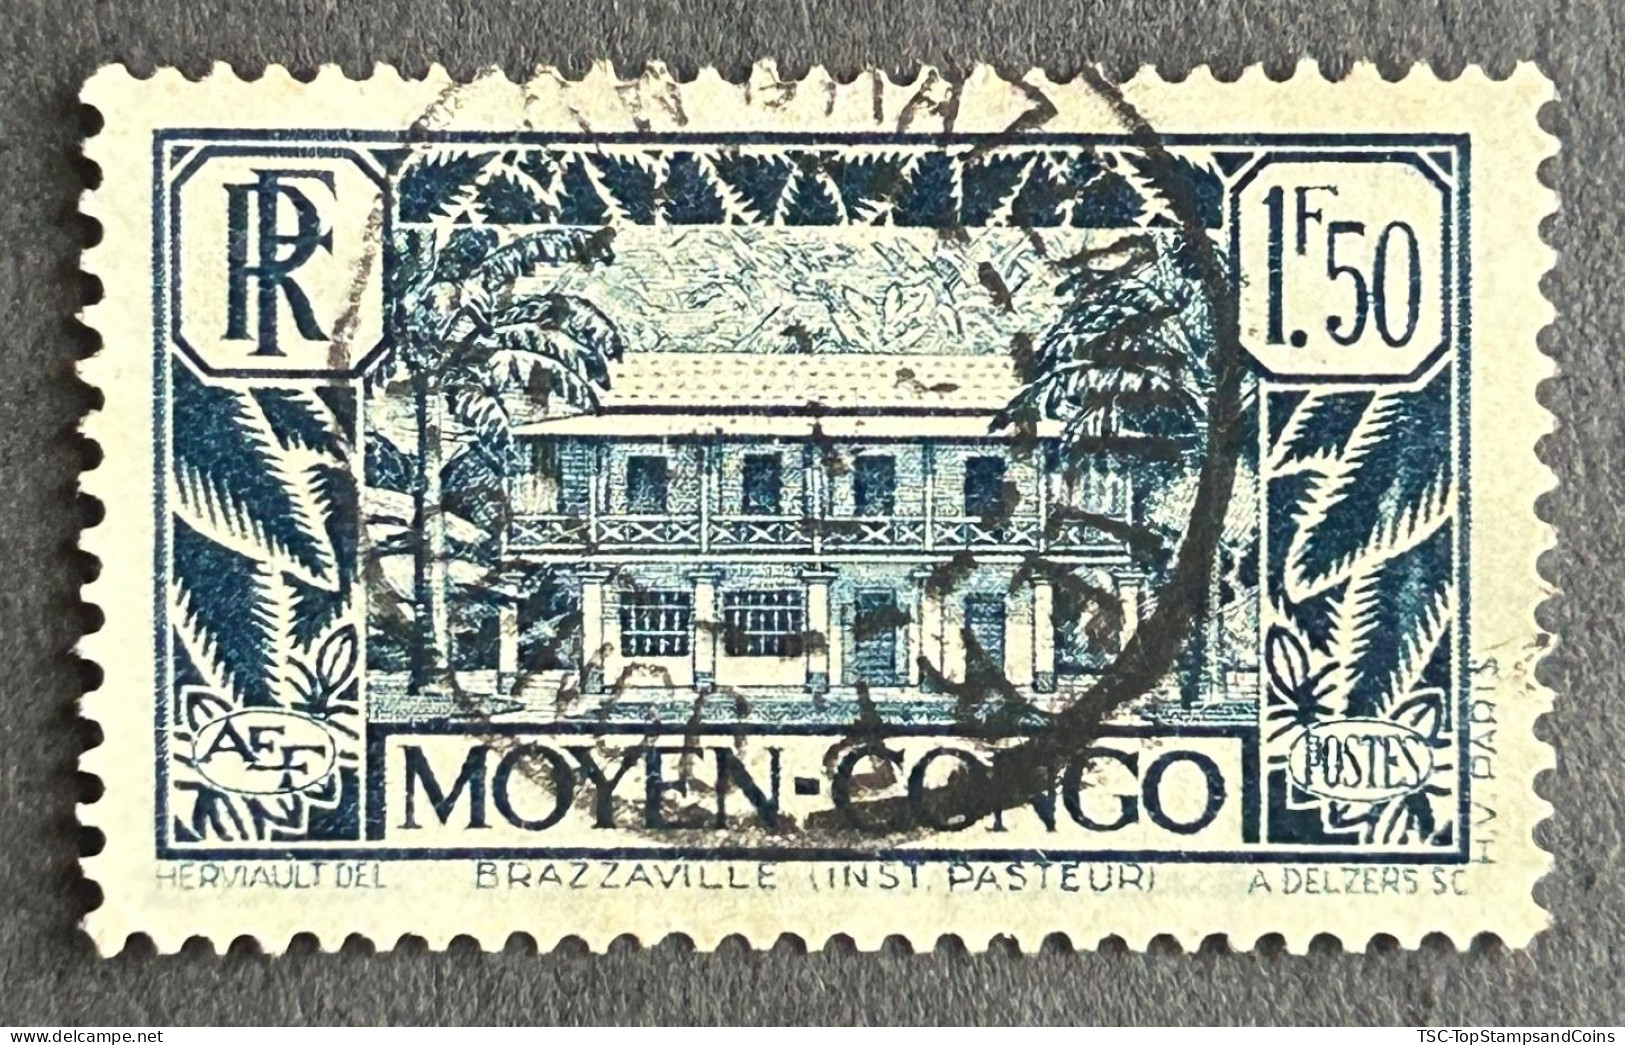 FRCG129U2 - Brazzaville - Pasteur Institute - 1.50 F Used Stamp - Middle Congo - 1933 - Gebraucht